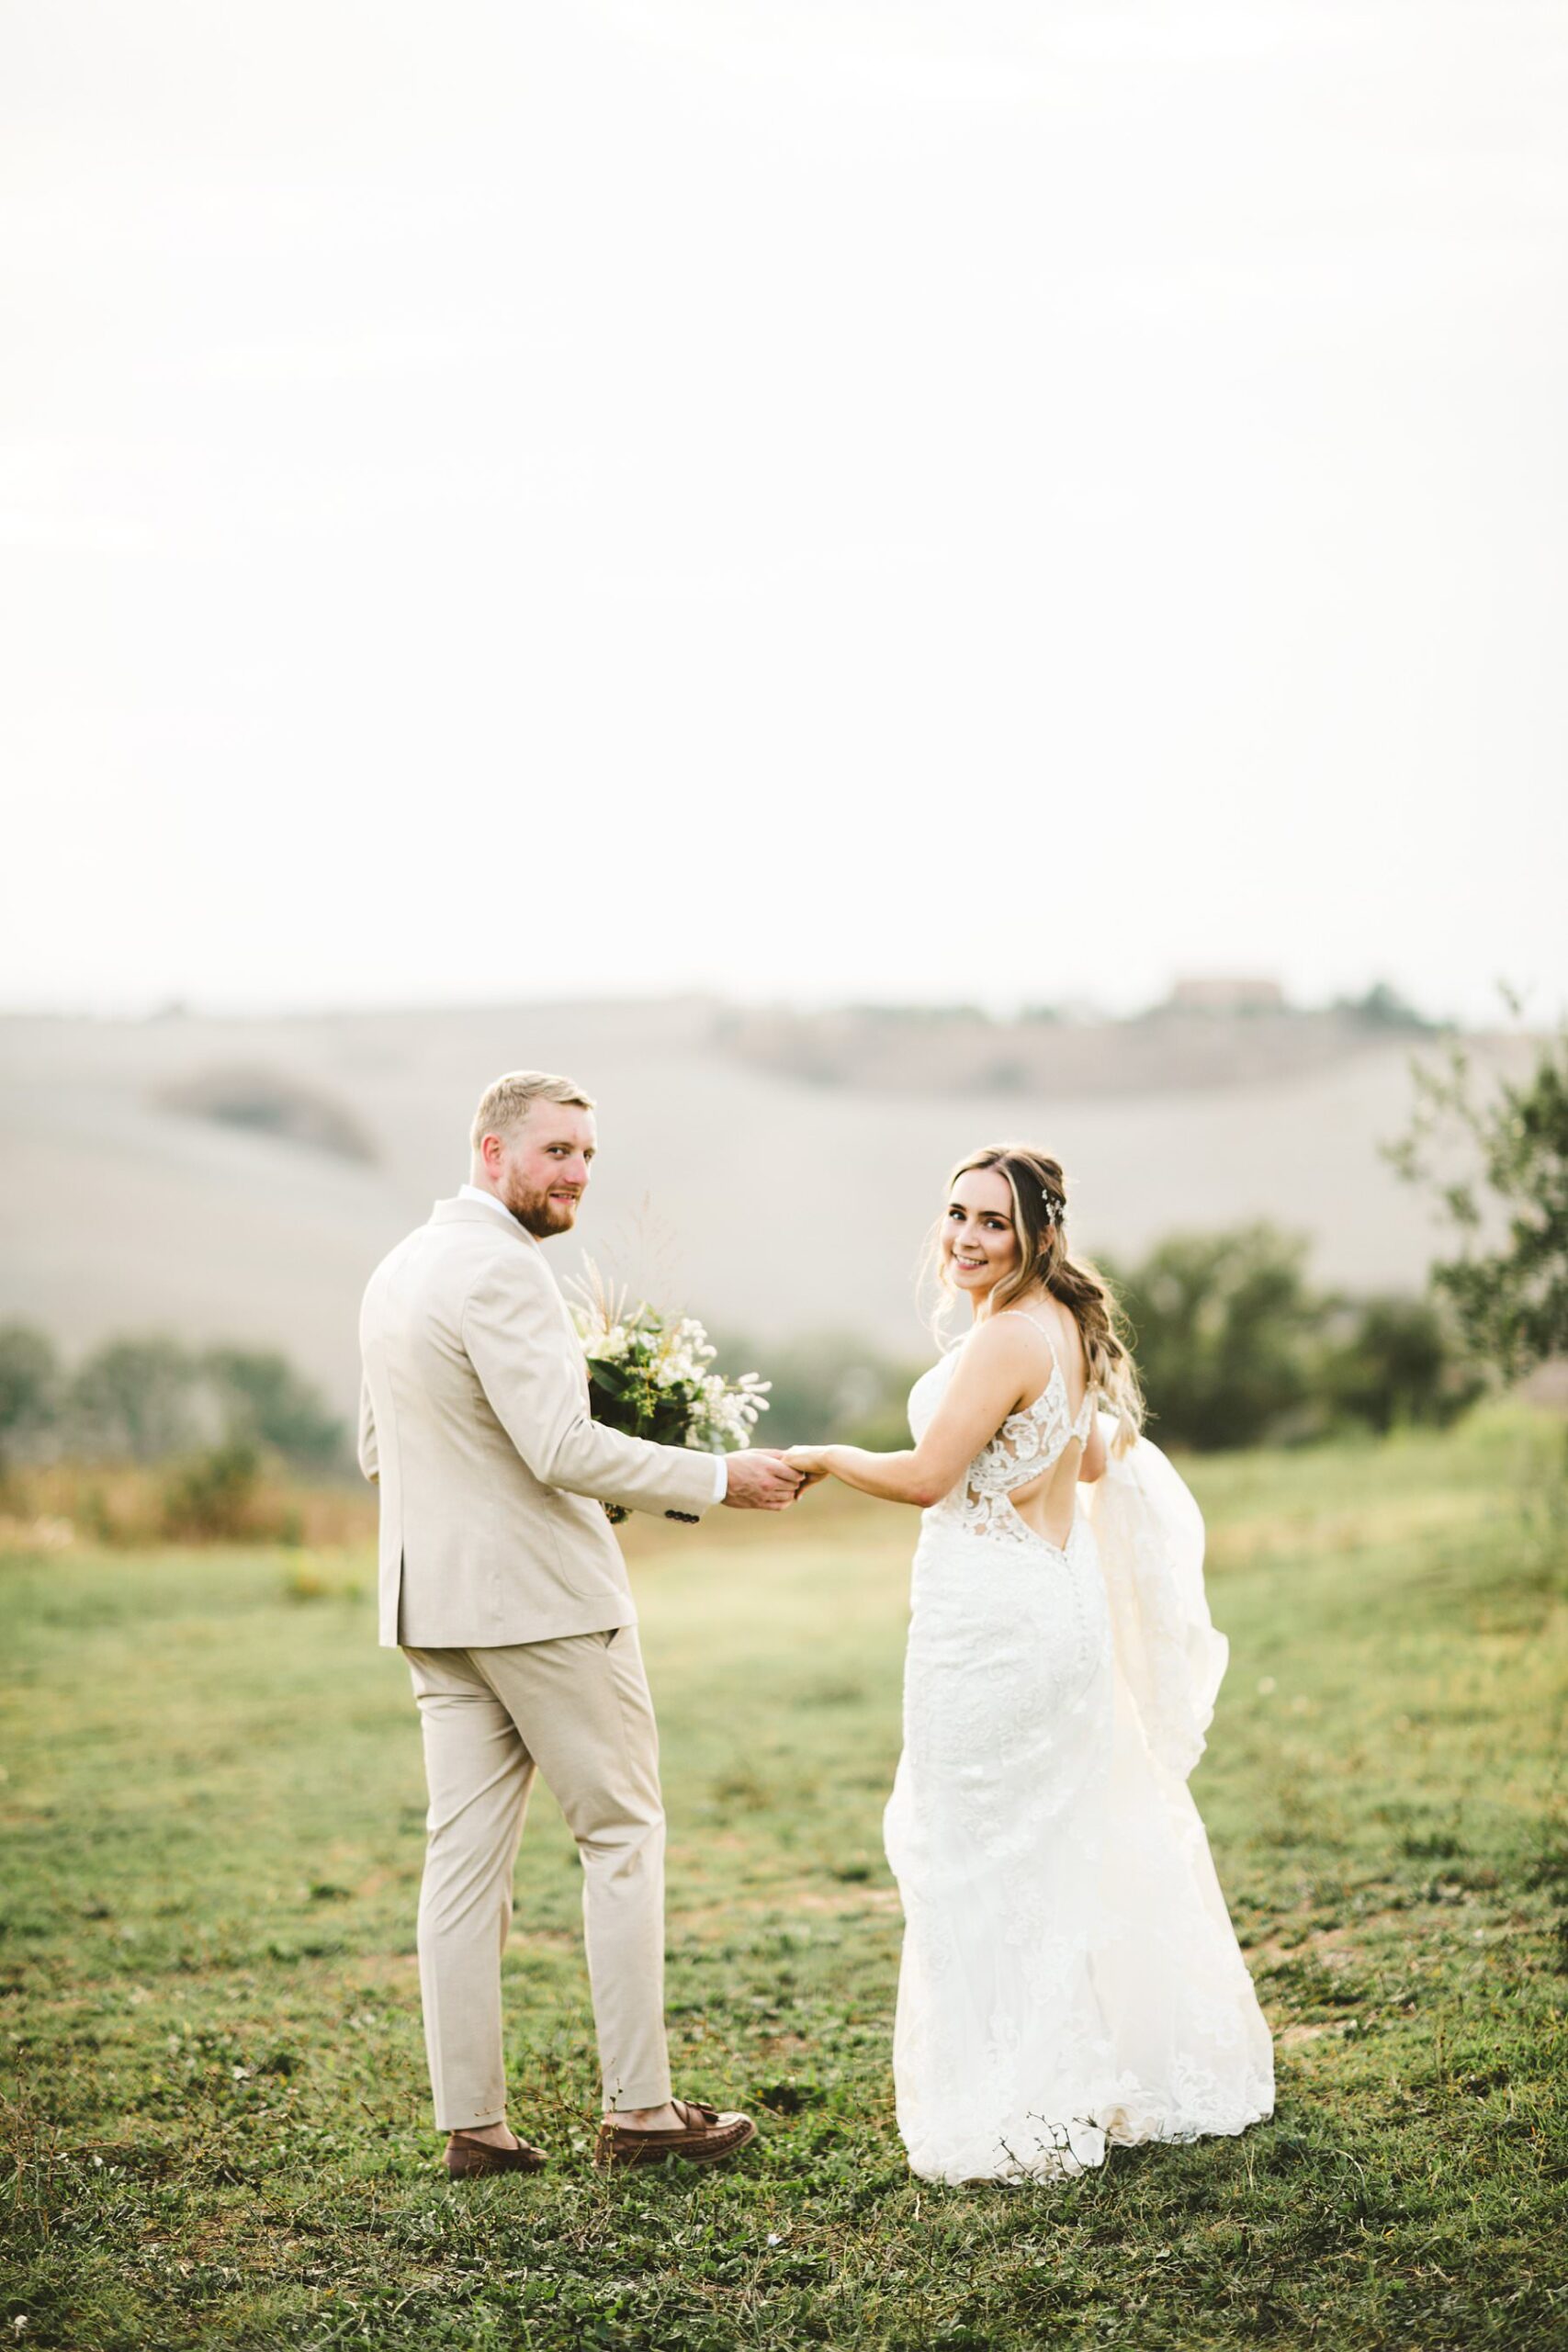 A dreamy small wedding abroad, at Villa Boscarello in Val D’Orcia. Sam and Jerry’s small wedding abroad felt just like a dream. An intimate event that took place in a fabulous location in the heart of Tuscany